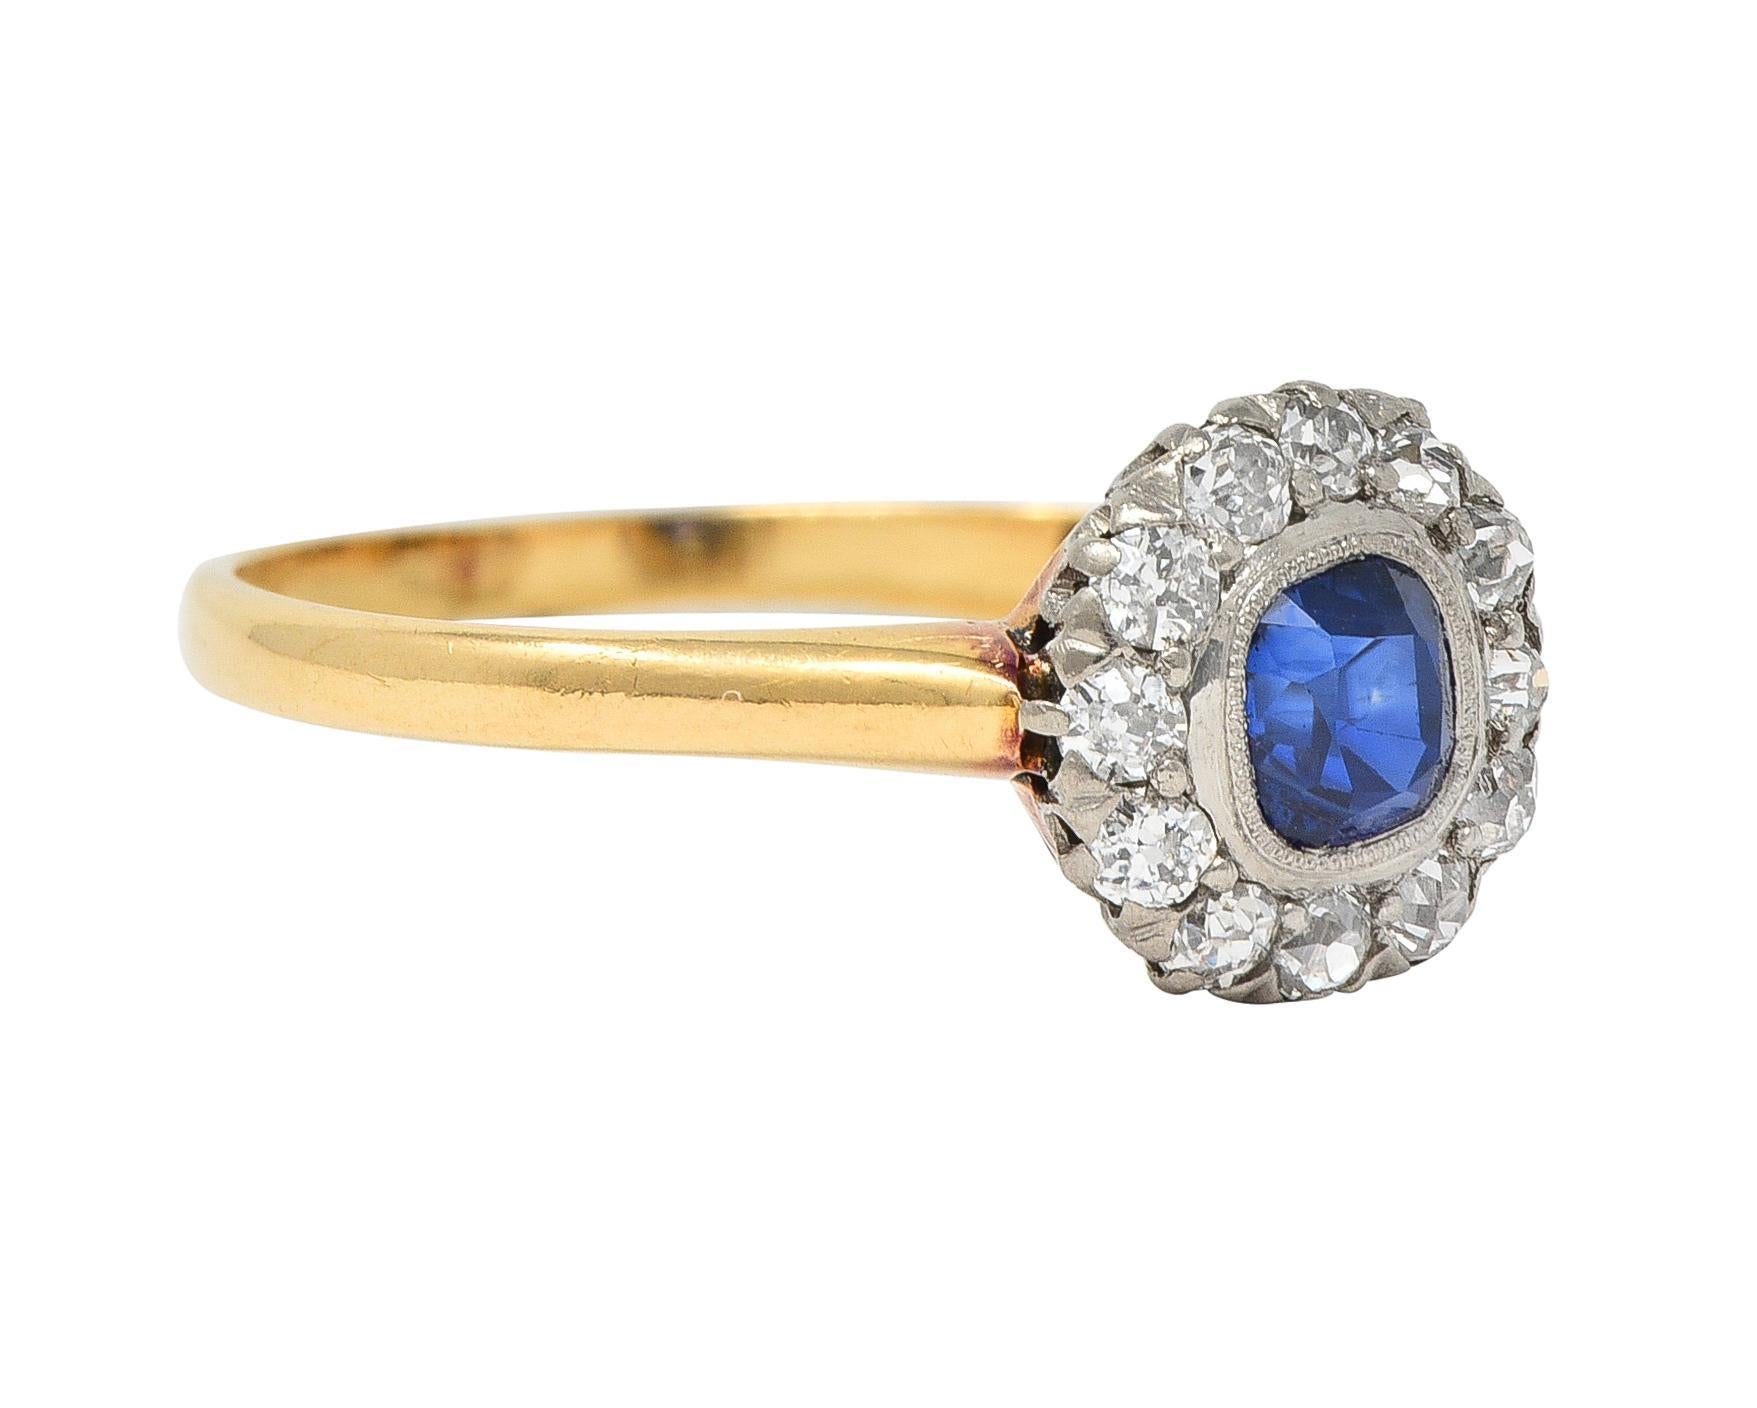 Centering a cushion cut sapphire weighing approximately 0.53 carat - transparent medium blue 
Set in a platinum bezel with milgrain detail and halo surround 
Comprised of prong set old European cut diamond
Weighing approximately 0.30 carat total -